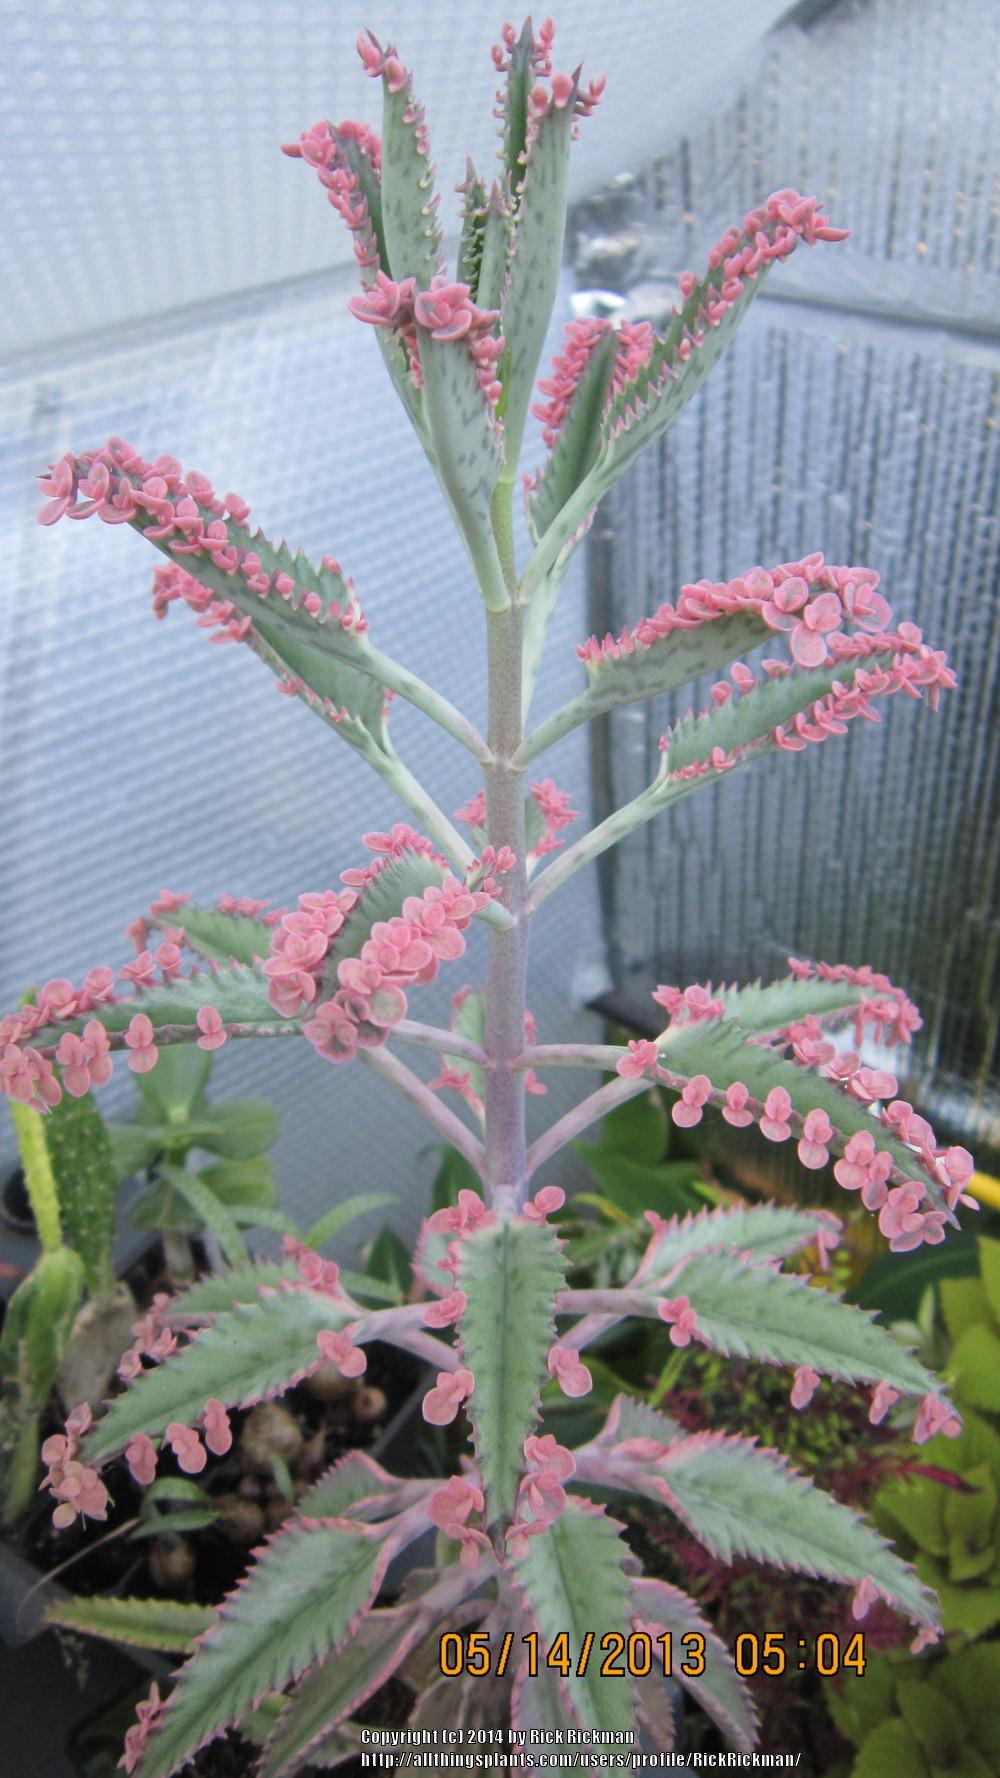 Photo of Pink Mother of Thousands (Kalanchoe 'Pink Butterflies') uploaded by RickRickman